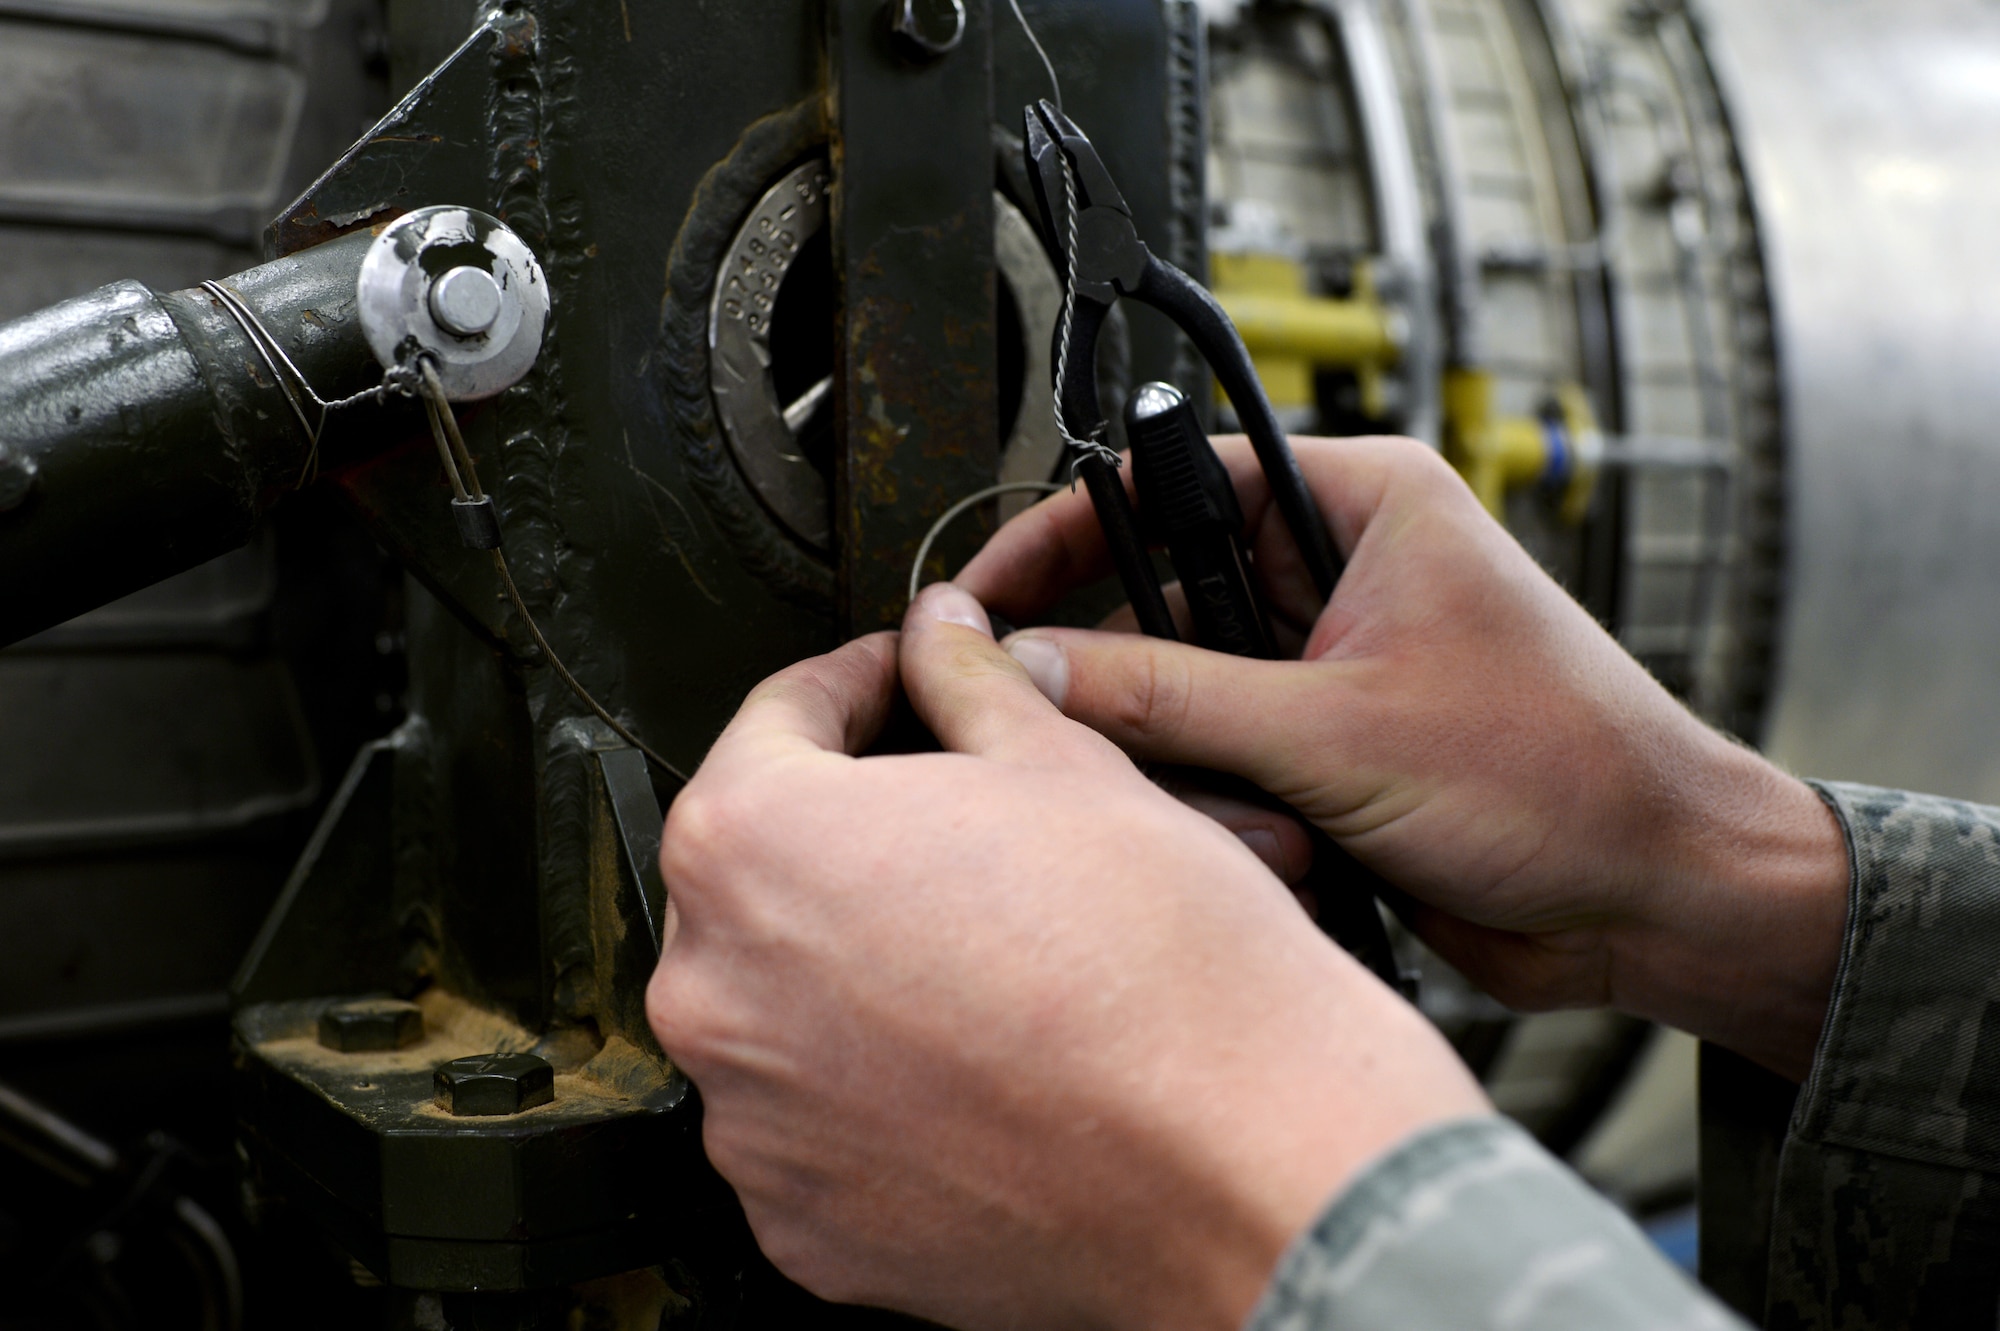 U.S. Air Force Airman 1st Class Ryan Richards, a 52nd Component Maintenance Squadron aerospace propulsion technician from Lake Placid, Fla., tightens a metal wire on a jet engine component in the propulsion shop at Spangdahlem Air Base, Germany, Sept. 9, 2014. The 52nd CMS Airmen practice precision to ensure all mechanical aircraft components function properly. (U.S. Air Force photo by Airman 1st Class Timothy Kim/Released)